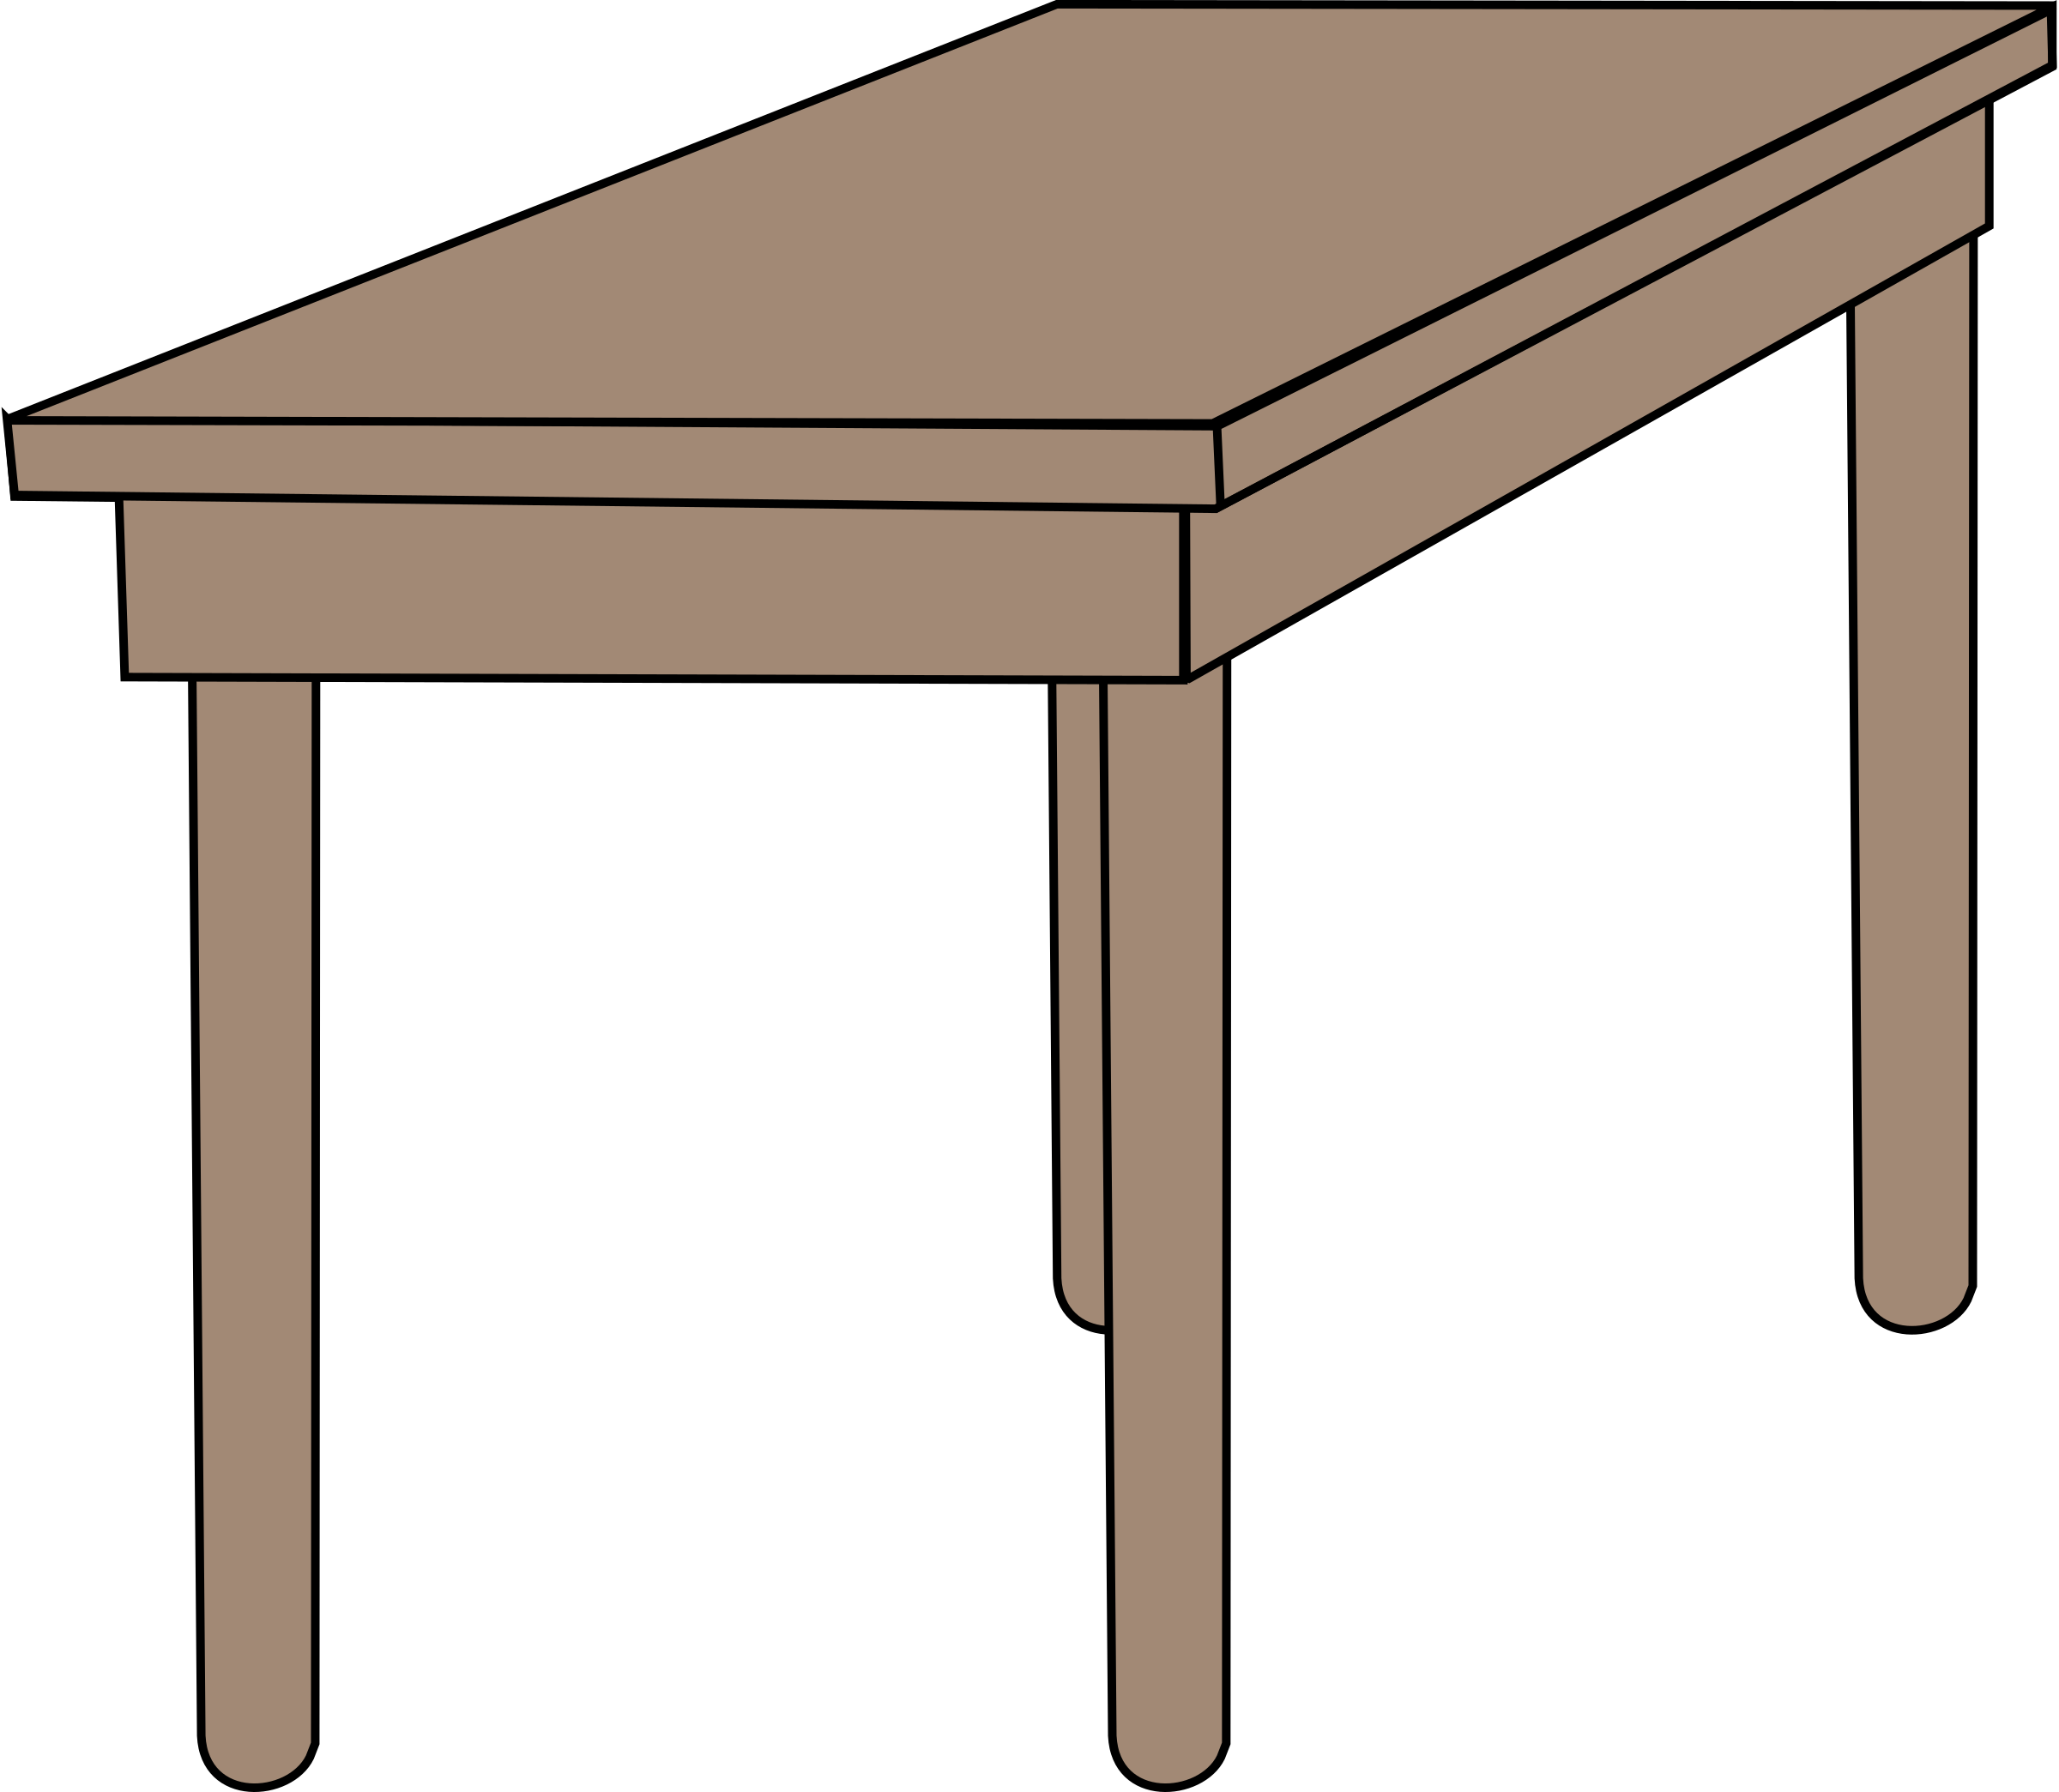 Student table clipart